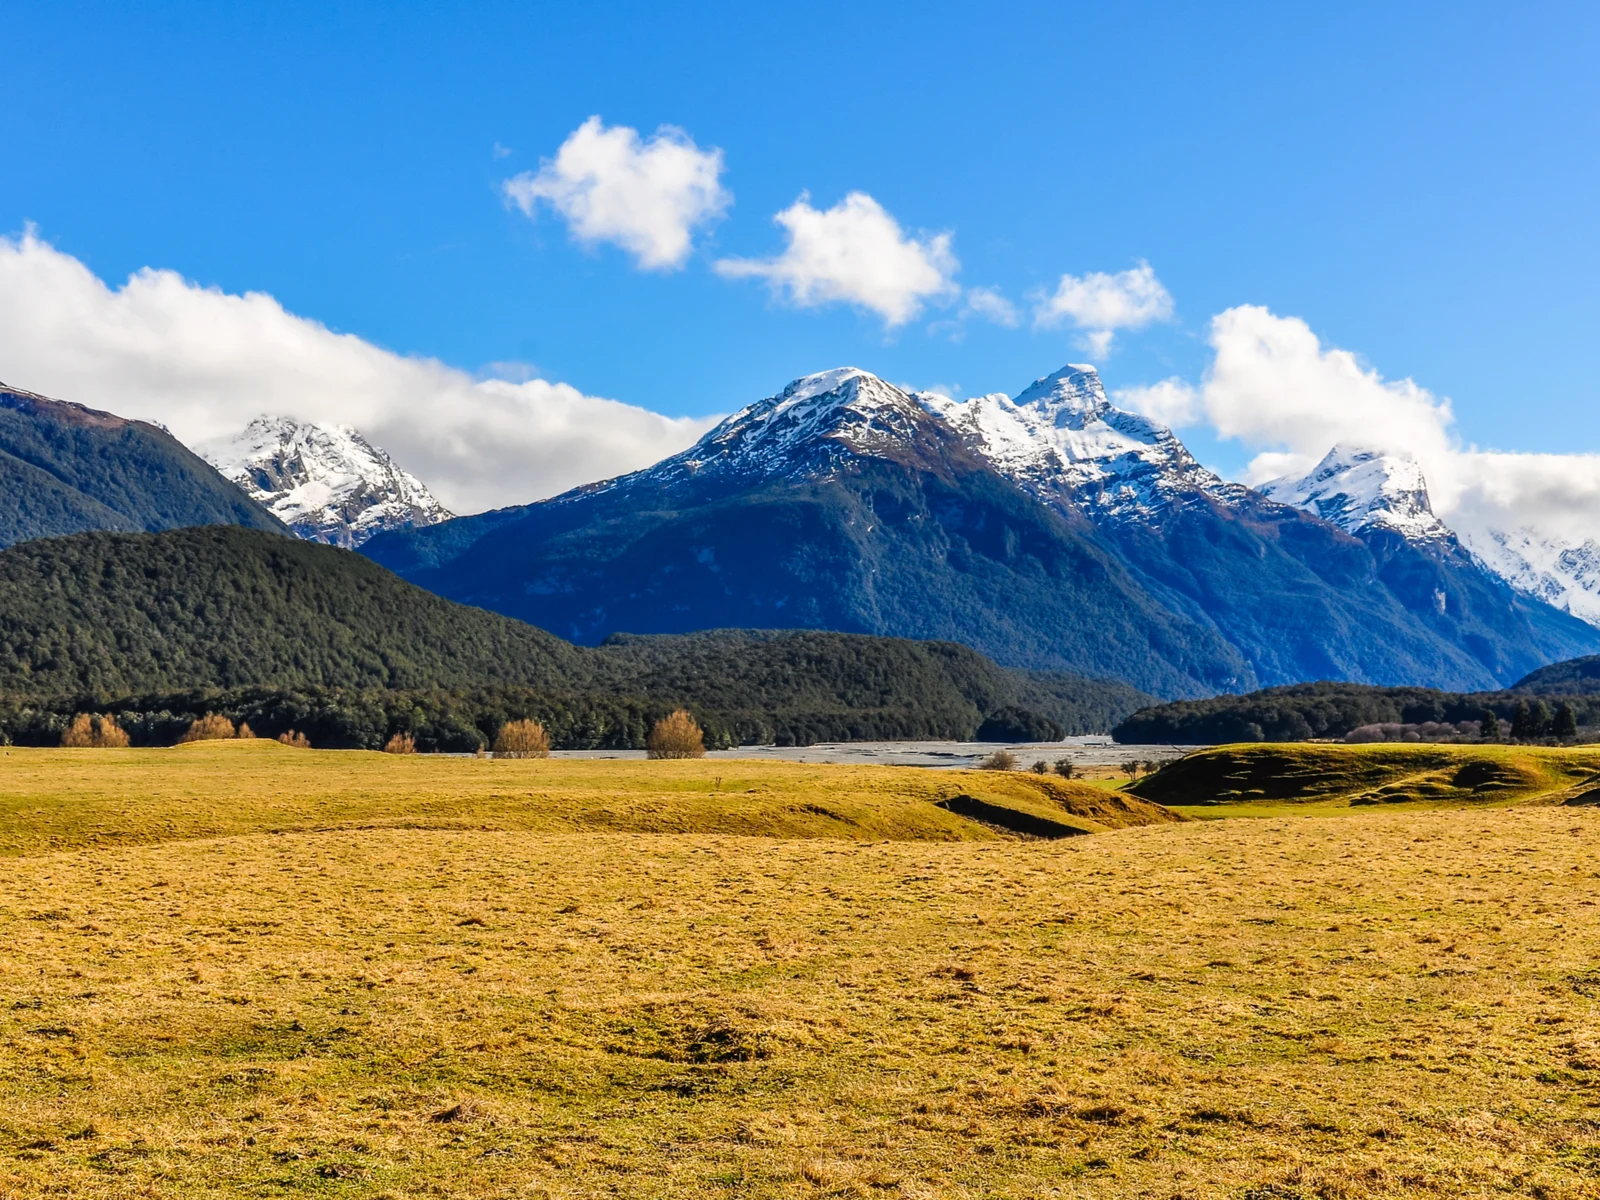 Mountain on a somewhat cloudy day in Glenorchy, a Lord of the Rings filming location that you can actually visit